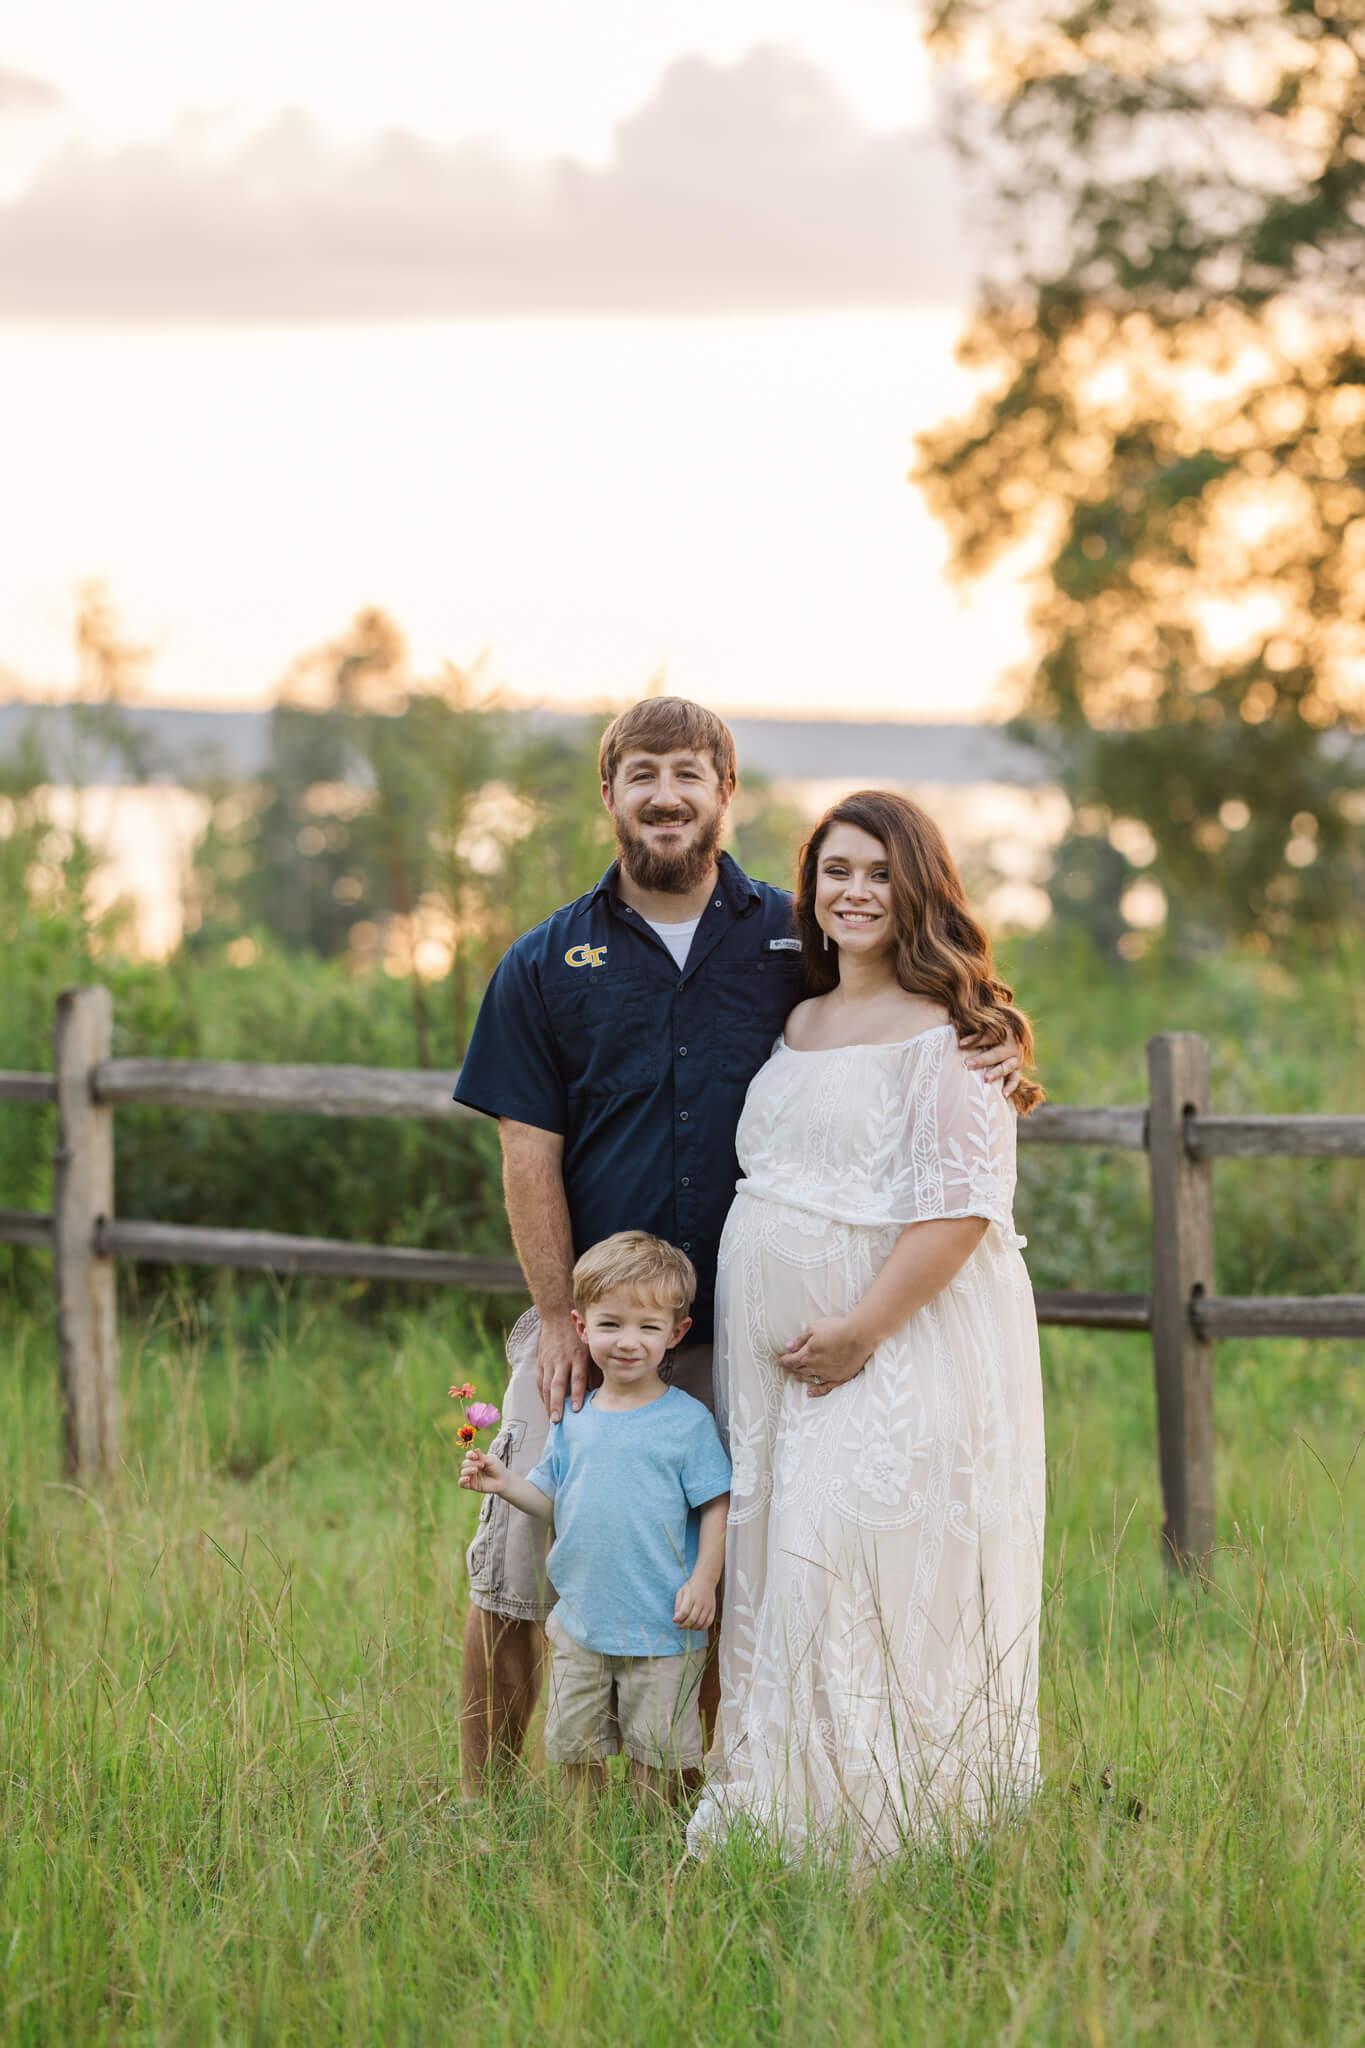 Family of three capturing a moment together during their family maternity session at Clarks Hill Lake